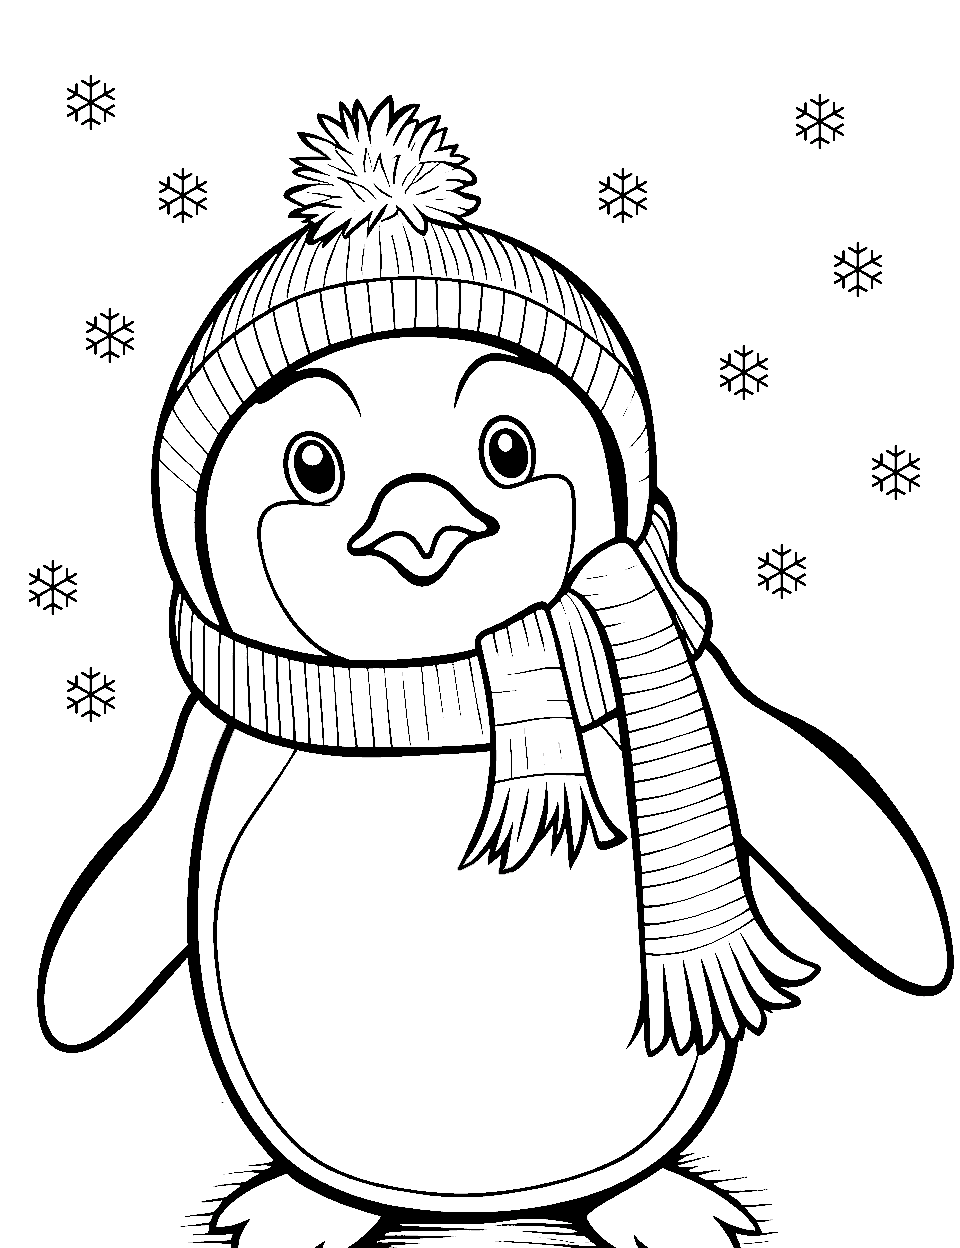 Penguin Chilling Coloring Page - A penguin wearing a scarf and a hat outside on a chilly day.